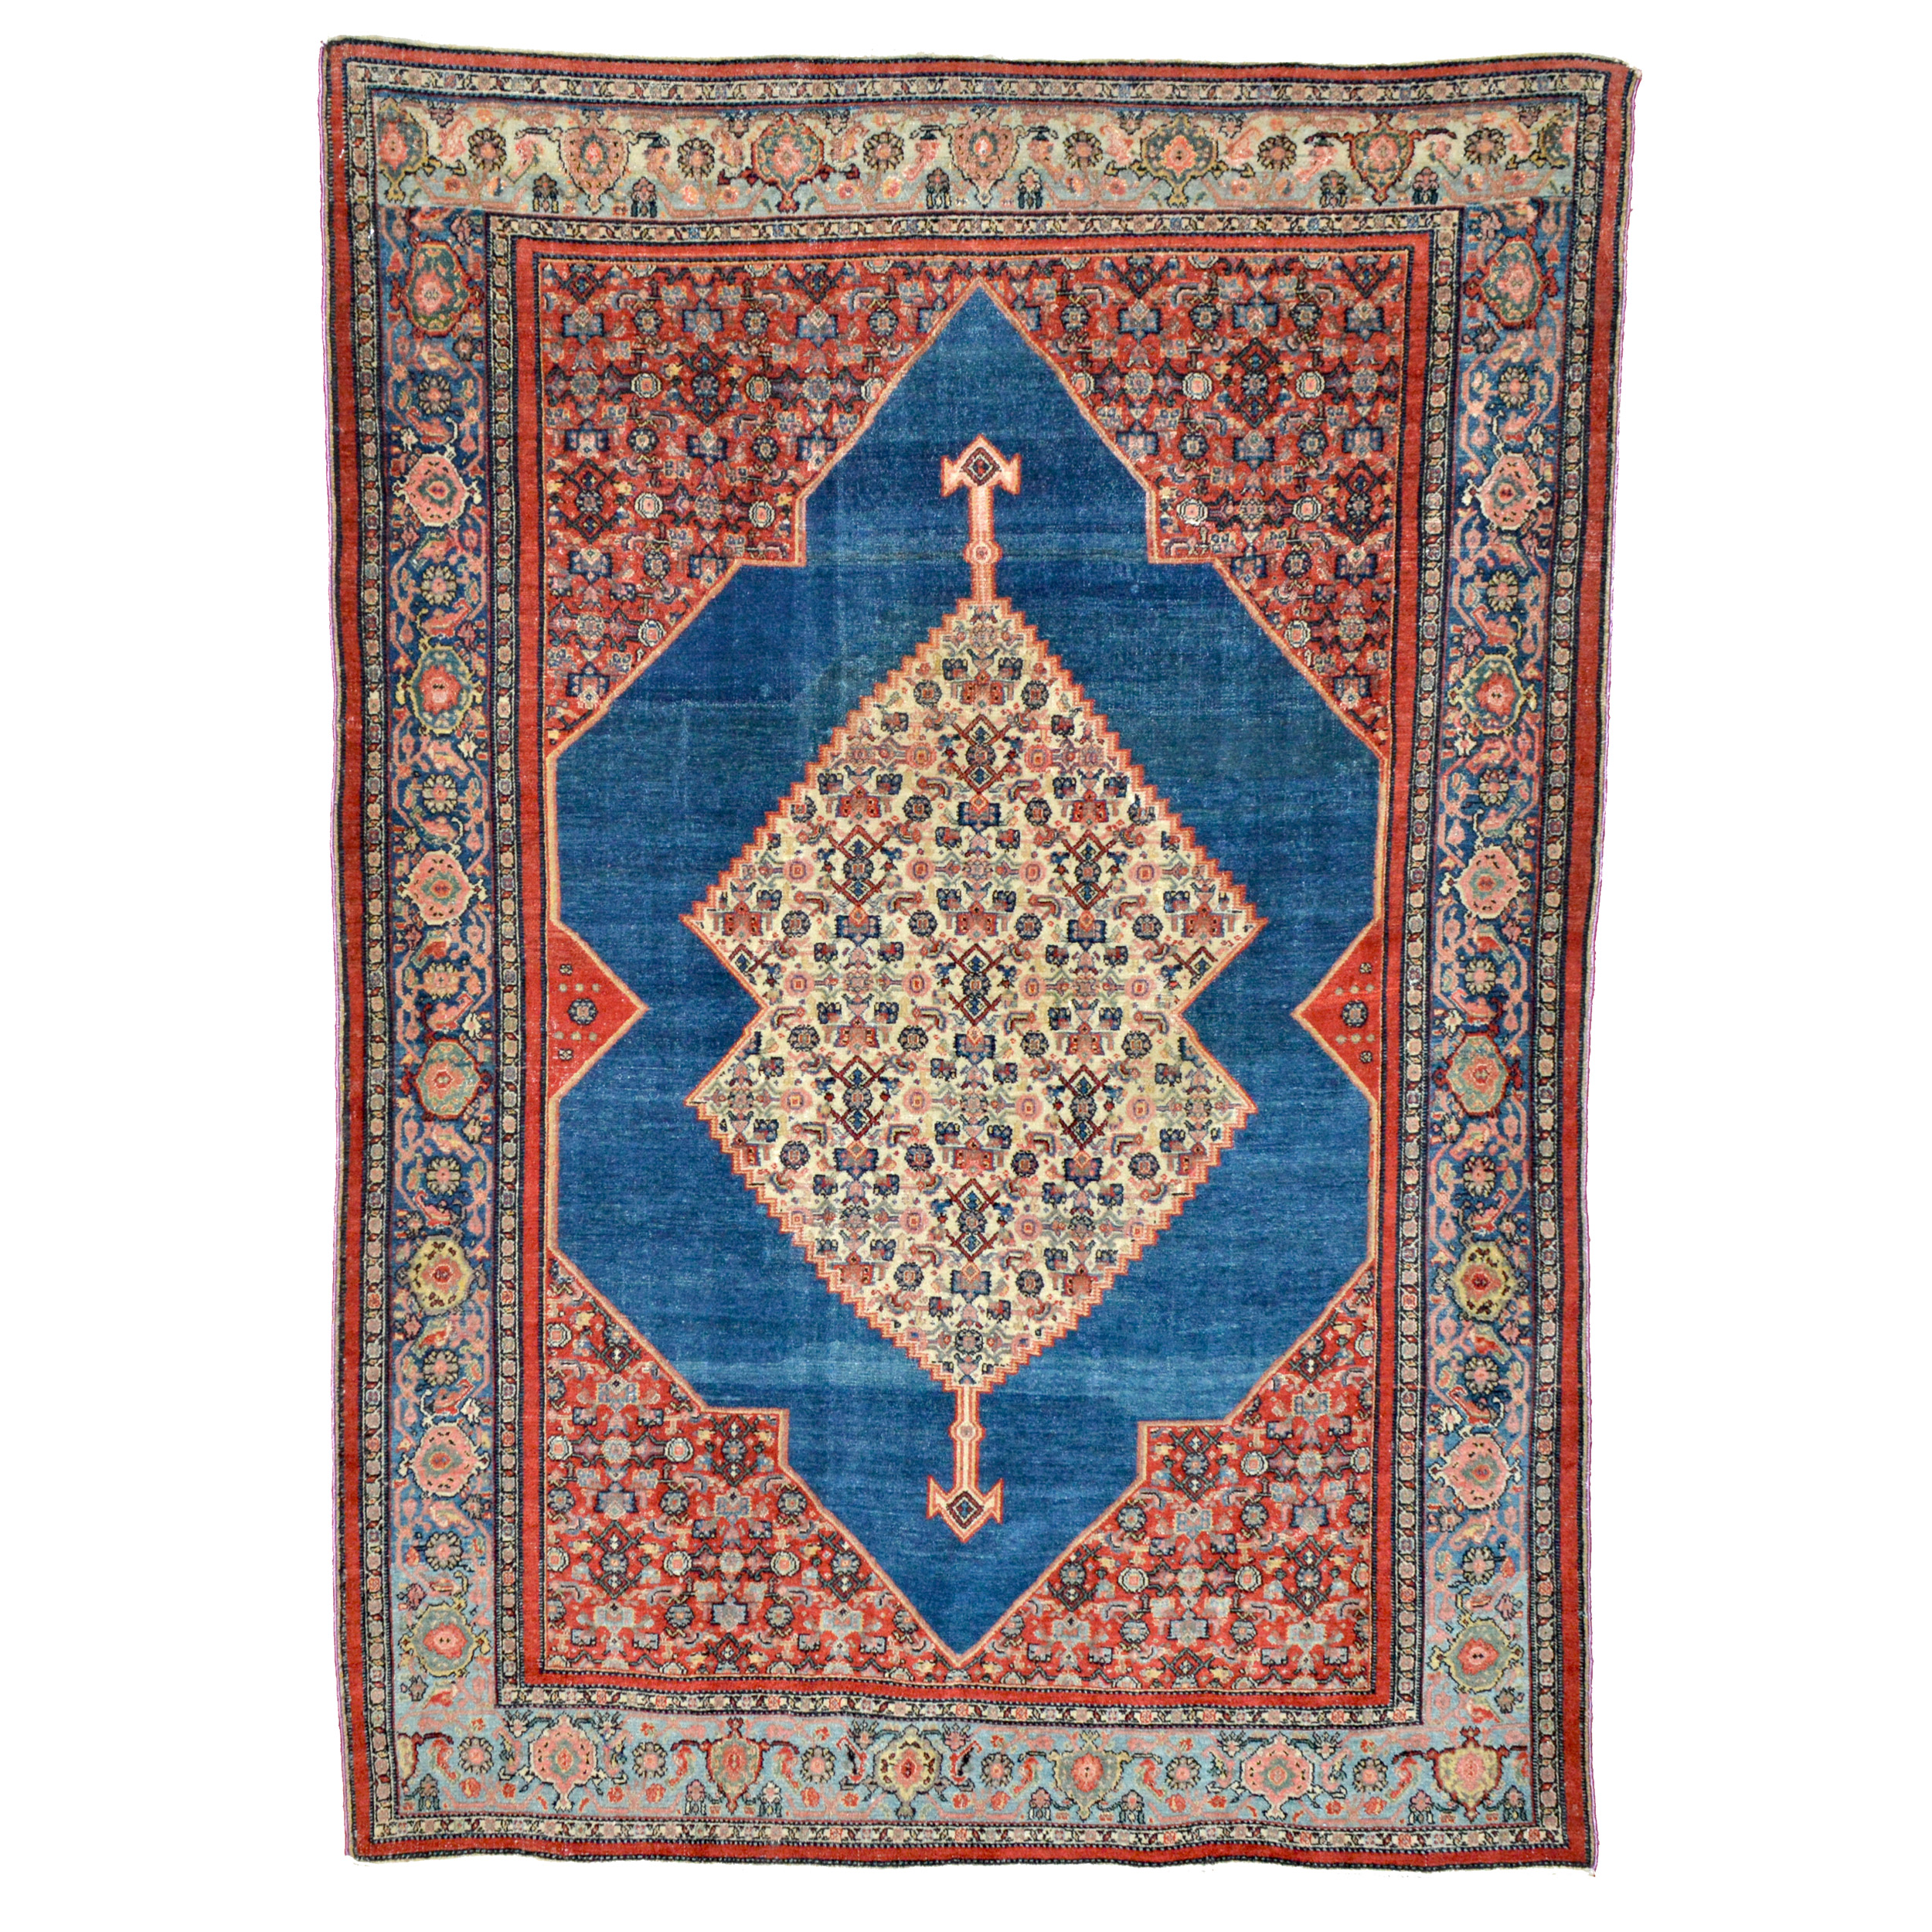 Antique northwest Persian Senneh rug with an abrashed denim blue open field and ivory medallion. Provenance: Boston area private collection, Amherst College (still retains label) - Douglas Stock Gallery, antique Oriental rugs Boston,MA area, New England